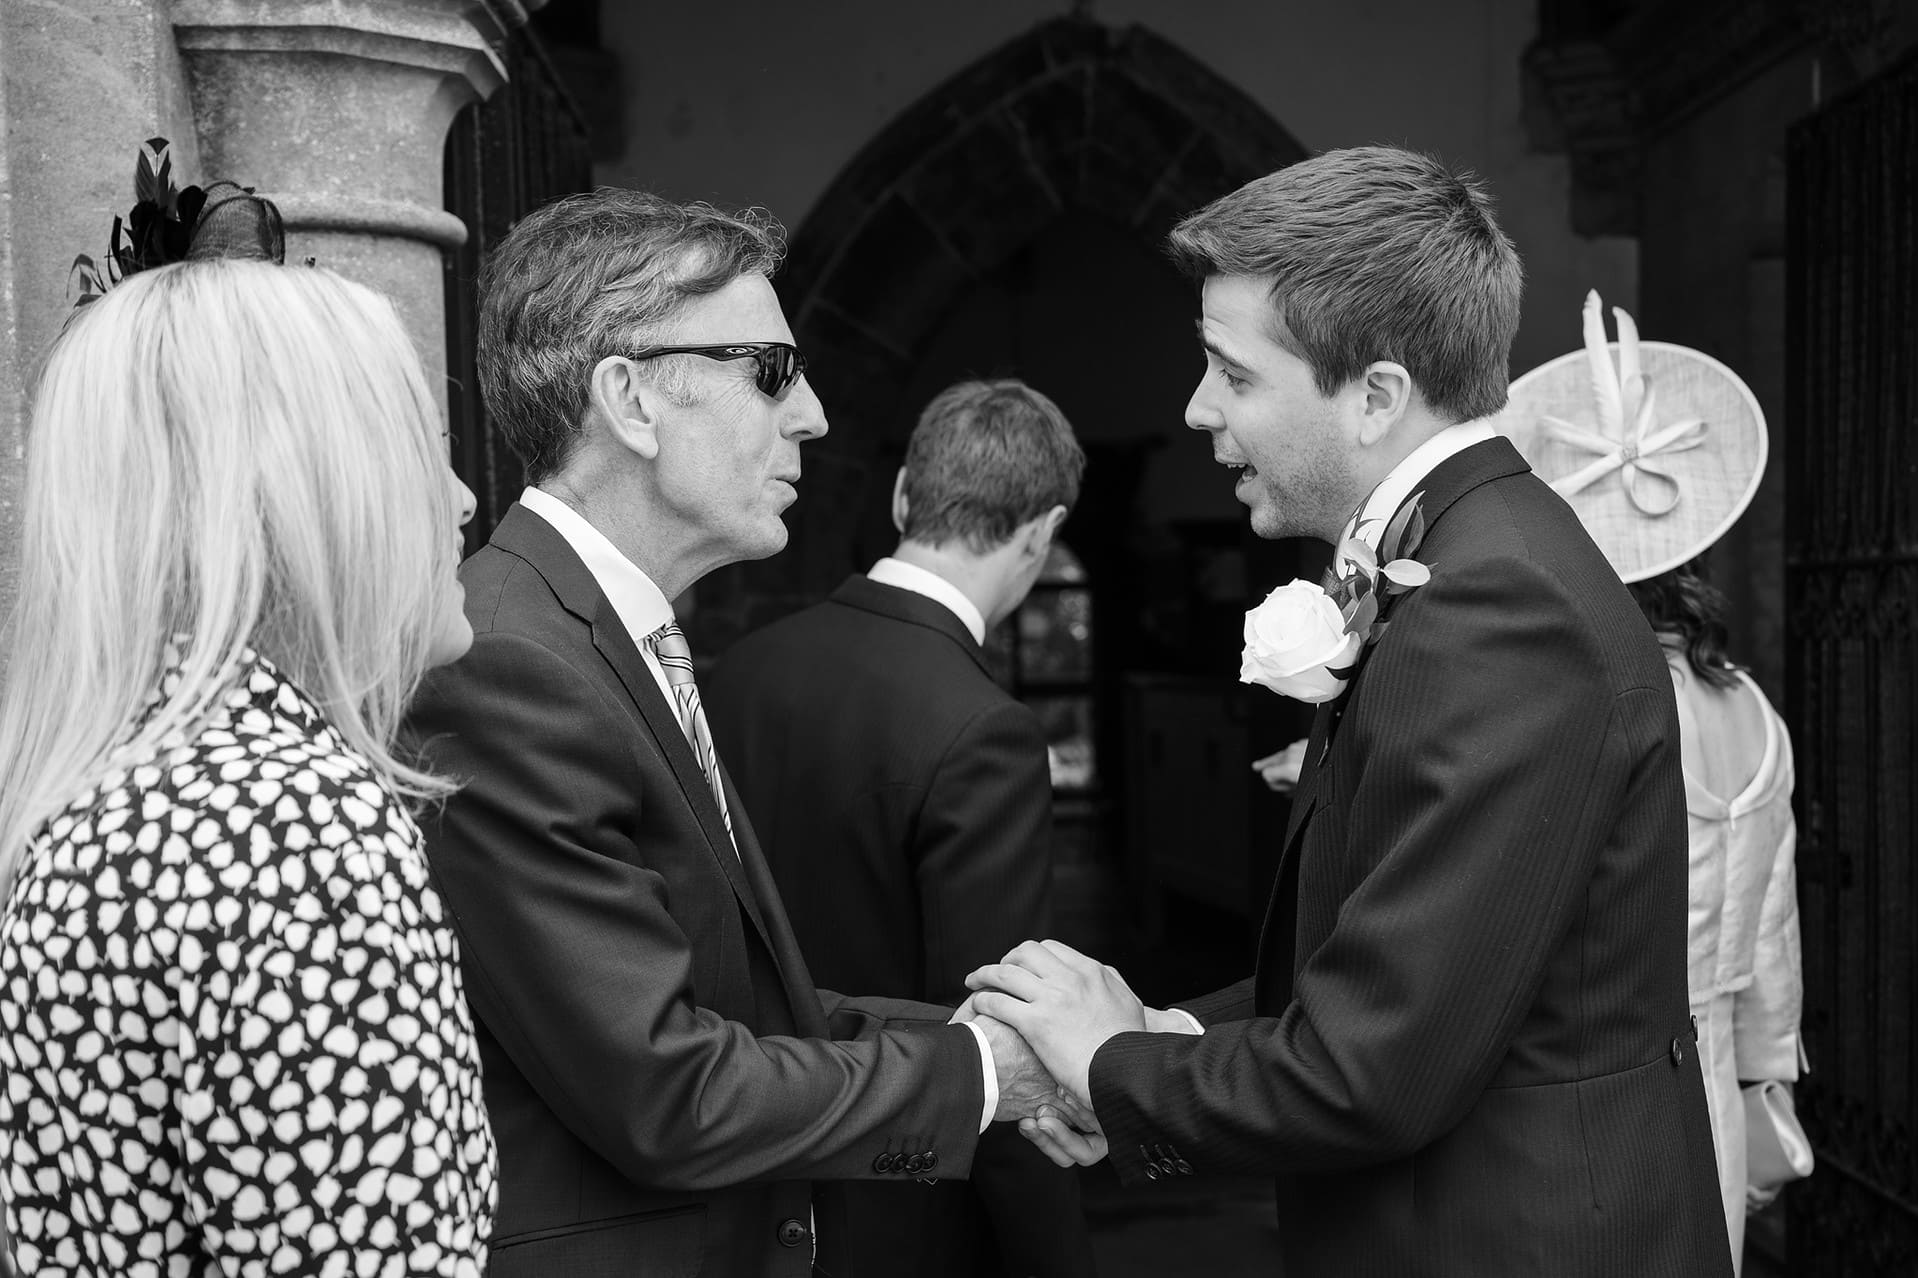 The groom holding hands with a wedding guest as they greet each other